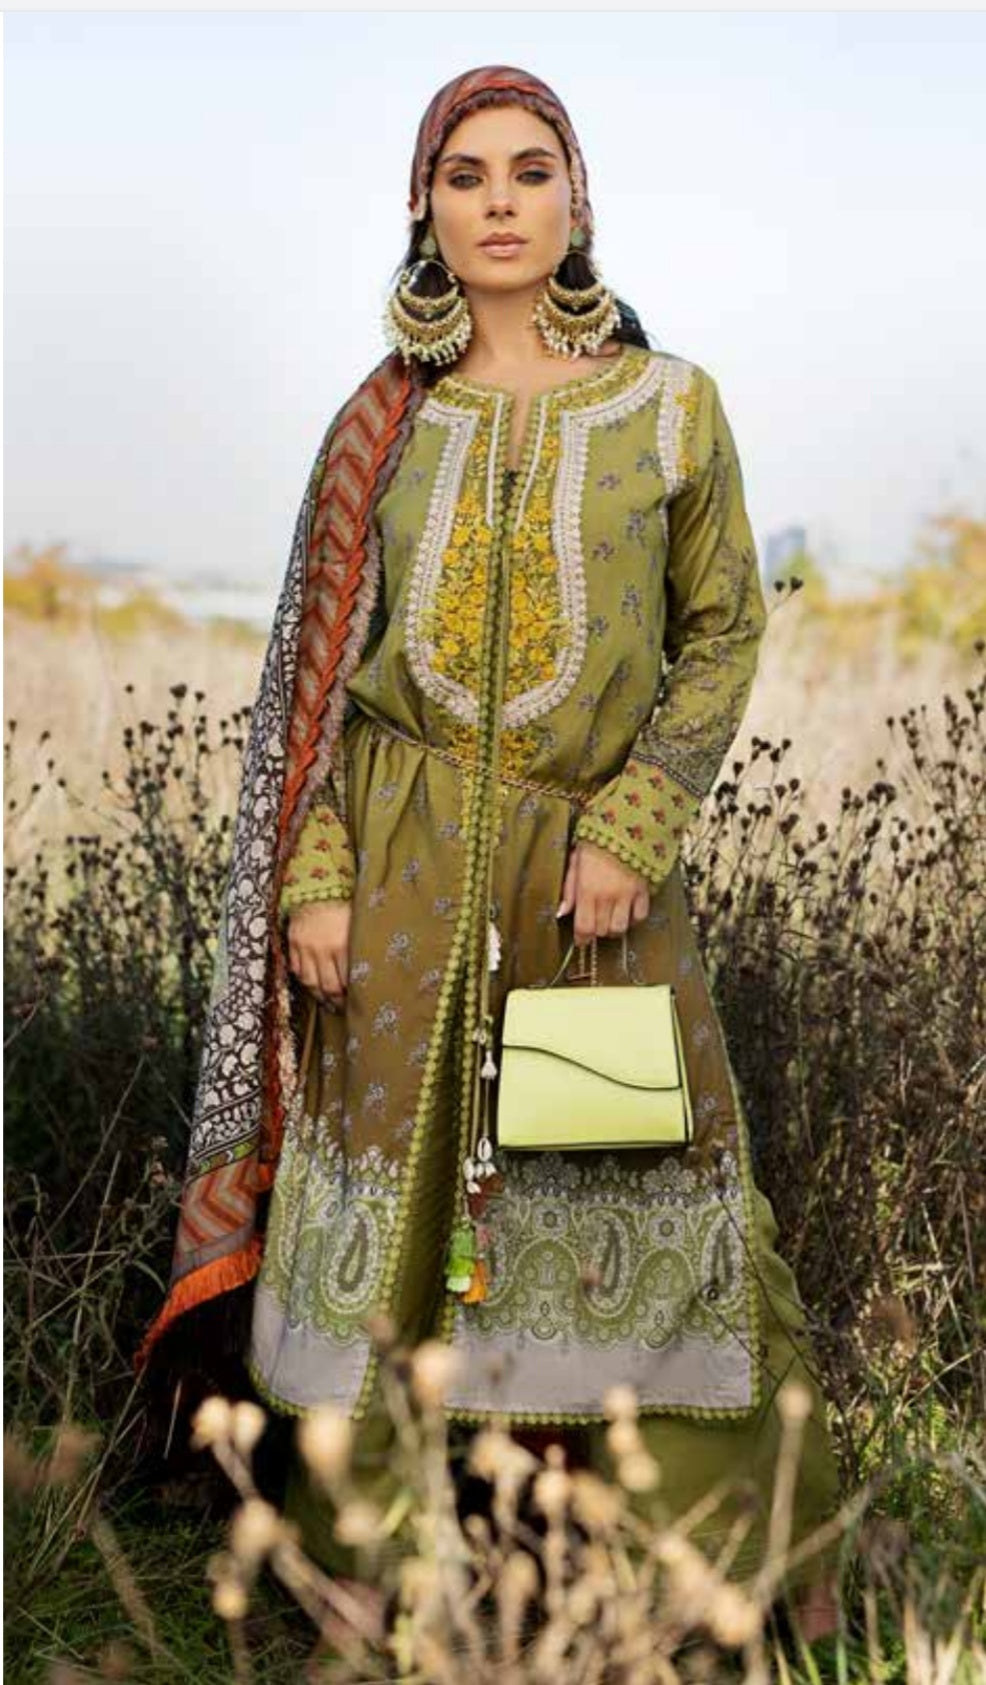 SOBIA NAZIR | SOBIA NAZIR WINTER COLLECTION 2022- Latest Pakistani Designer Women Wear made up of the best quality fabrics with latest styles. Branded Women Wear at discounted prices with Fast shipping on Salwar Kameez, Winter Shawl Collection, Lengha Choli, Bridal wear, winter wear, ready to wear, unstitched, stitched and customise @Lebbaasonline